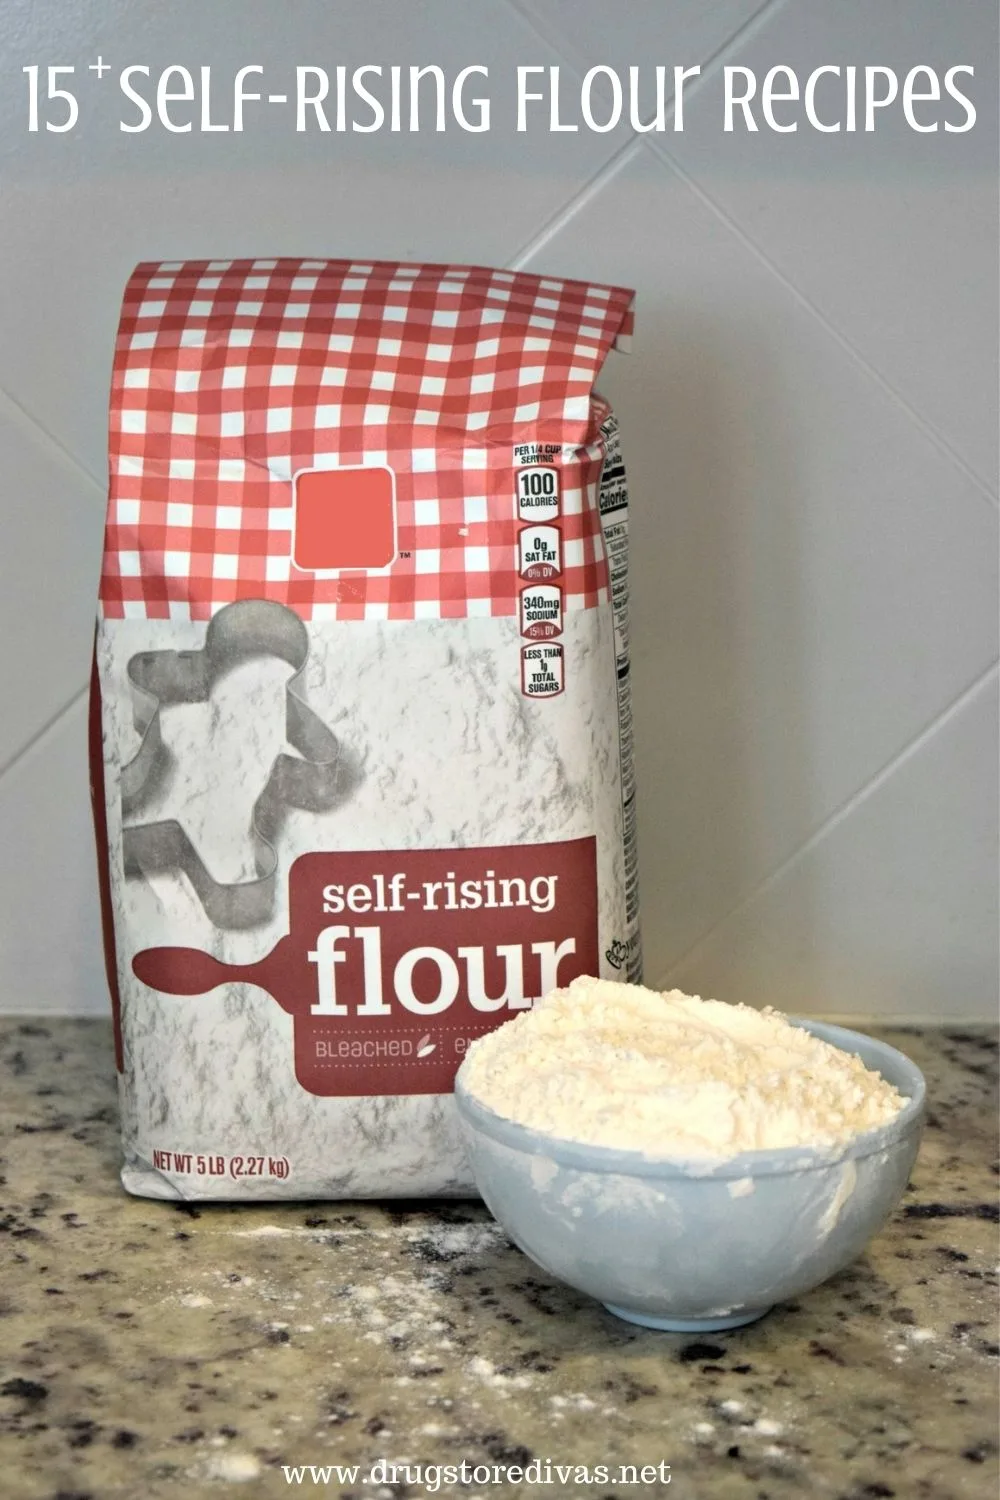 There are a ton of self-rising flour recipes you can make at home. Use it in everything from homemade Pop Tarts to pizza to pita chips.